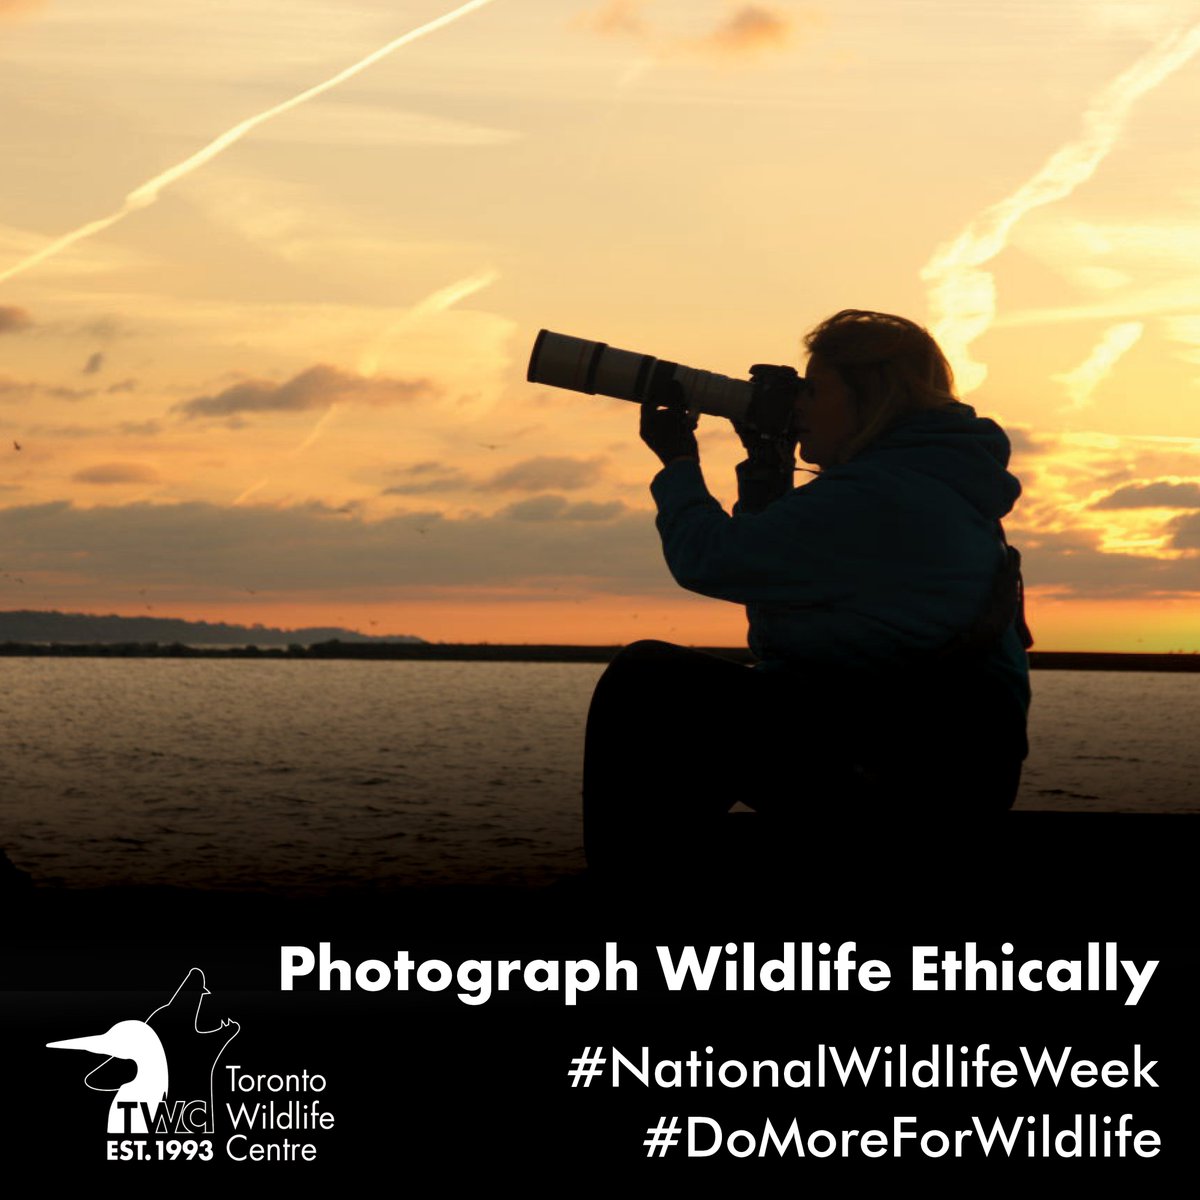 #NationalWildlifeWeek is a perfect time for a refresher on wildlife photography ethics! Baiting, flash photography and other negative actions is stressful and could cost an animal its life. You can #DoMoreForWildlife by being safe and respecting animals when photographing them.